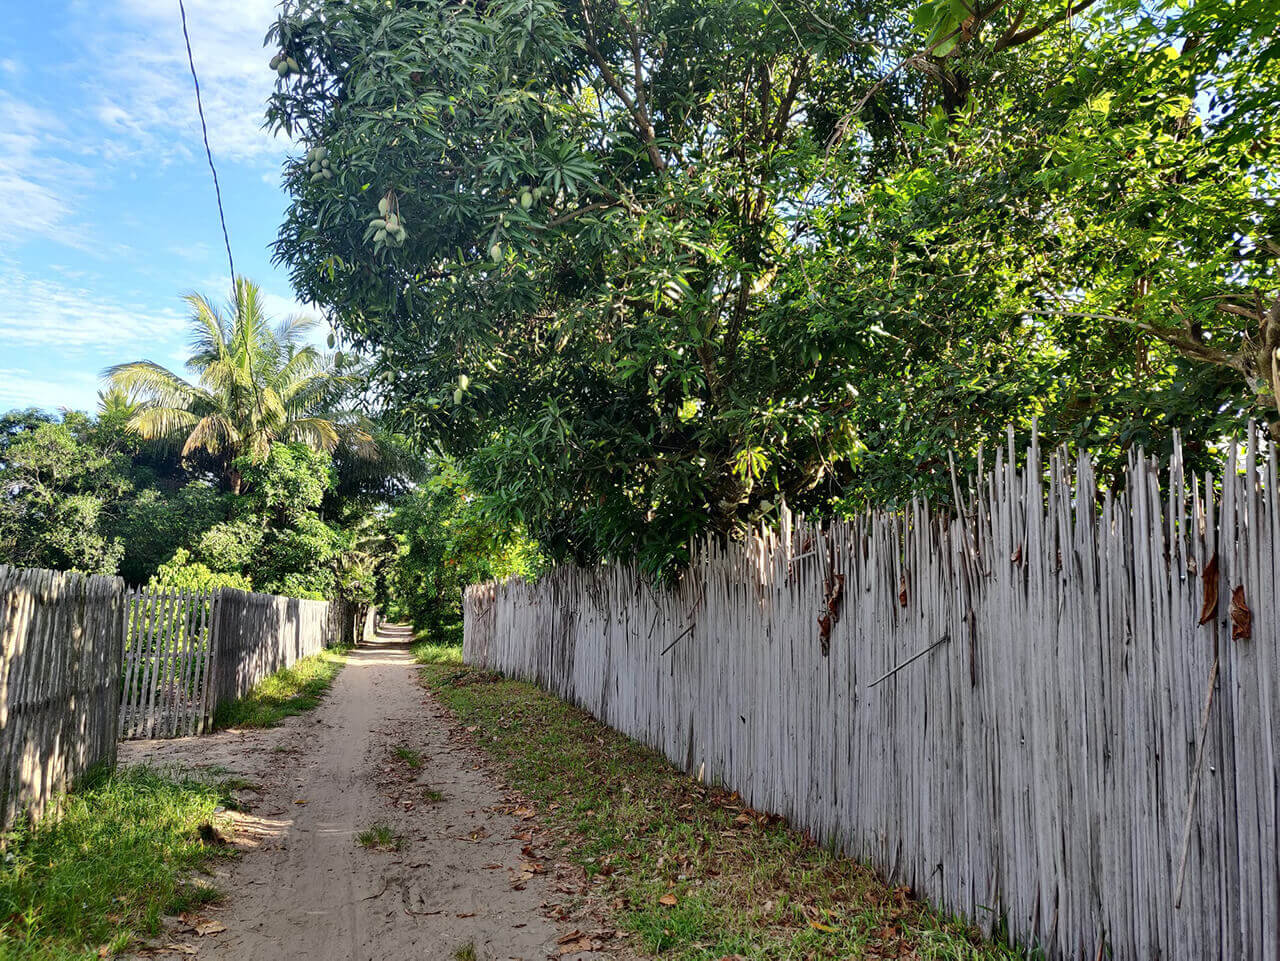 A fence-lined street, covered in beach sand, and shaded by the trees.